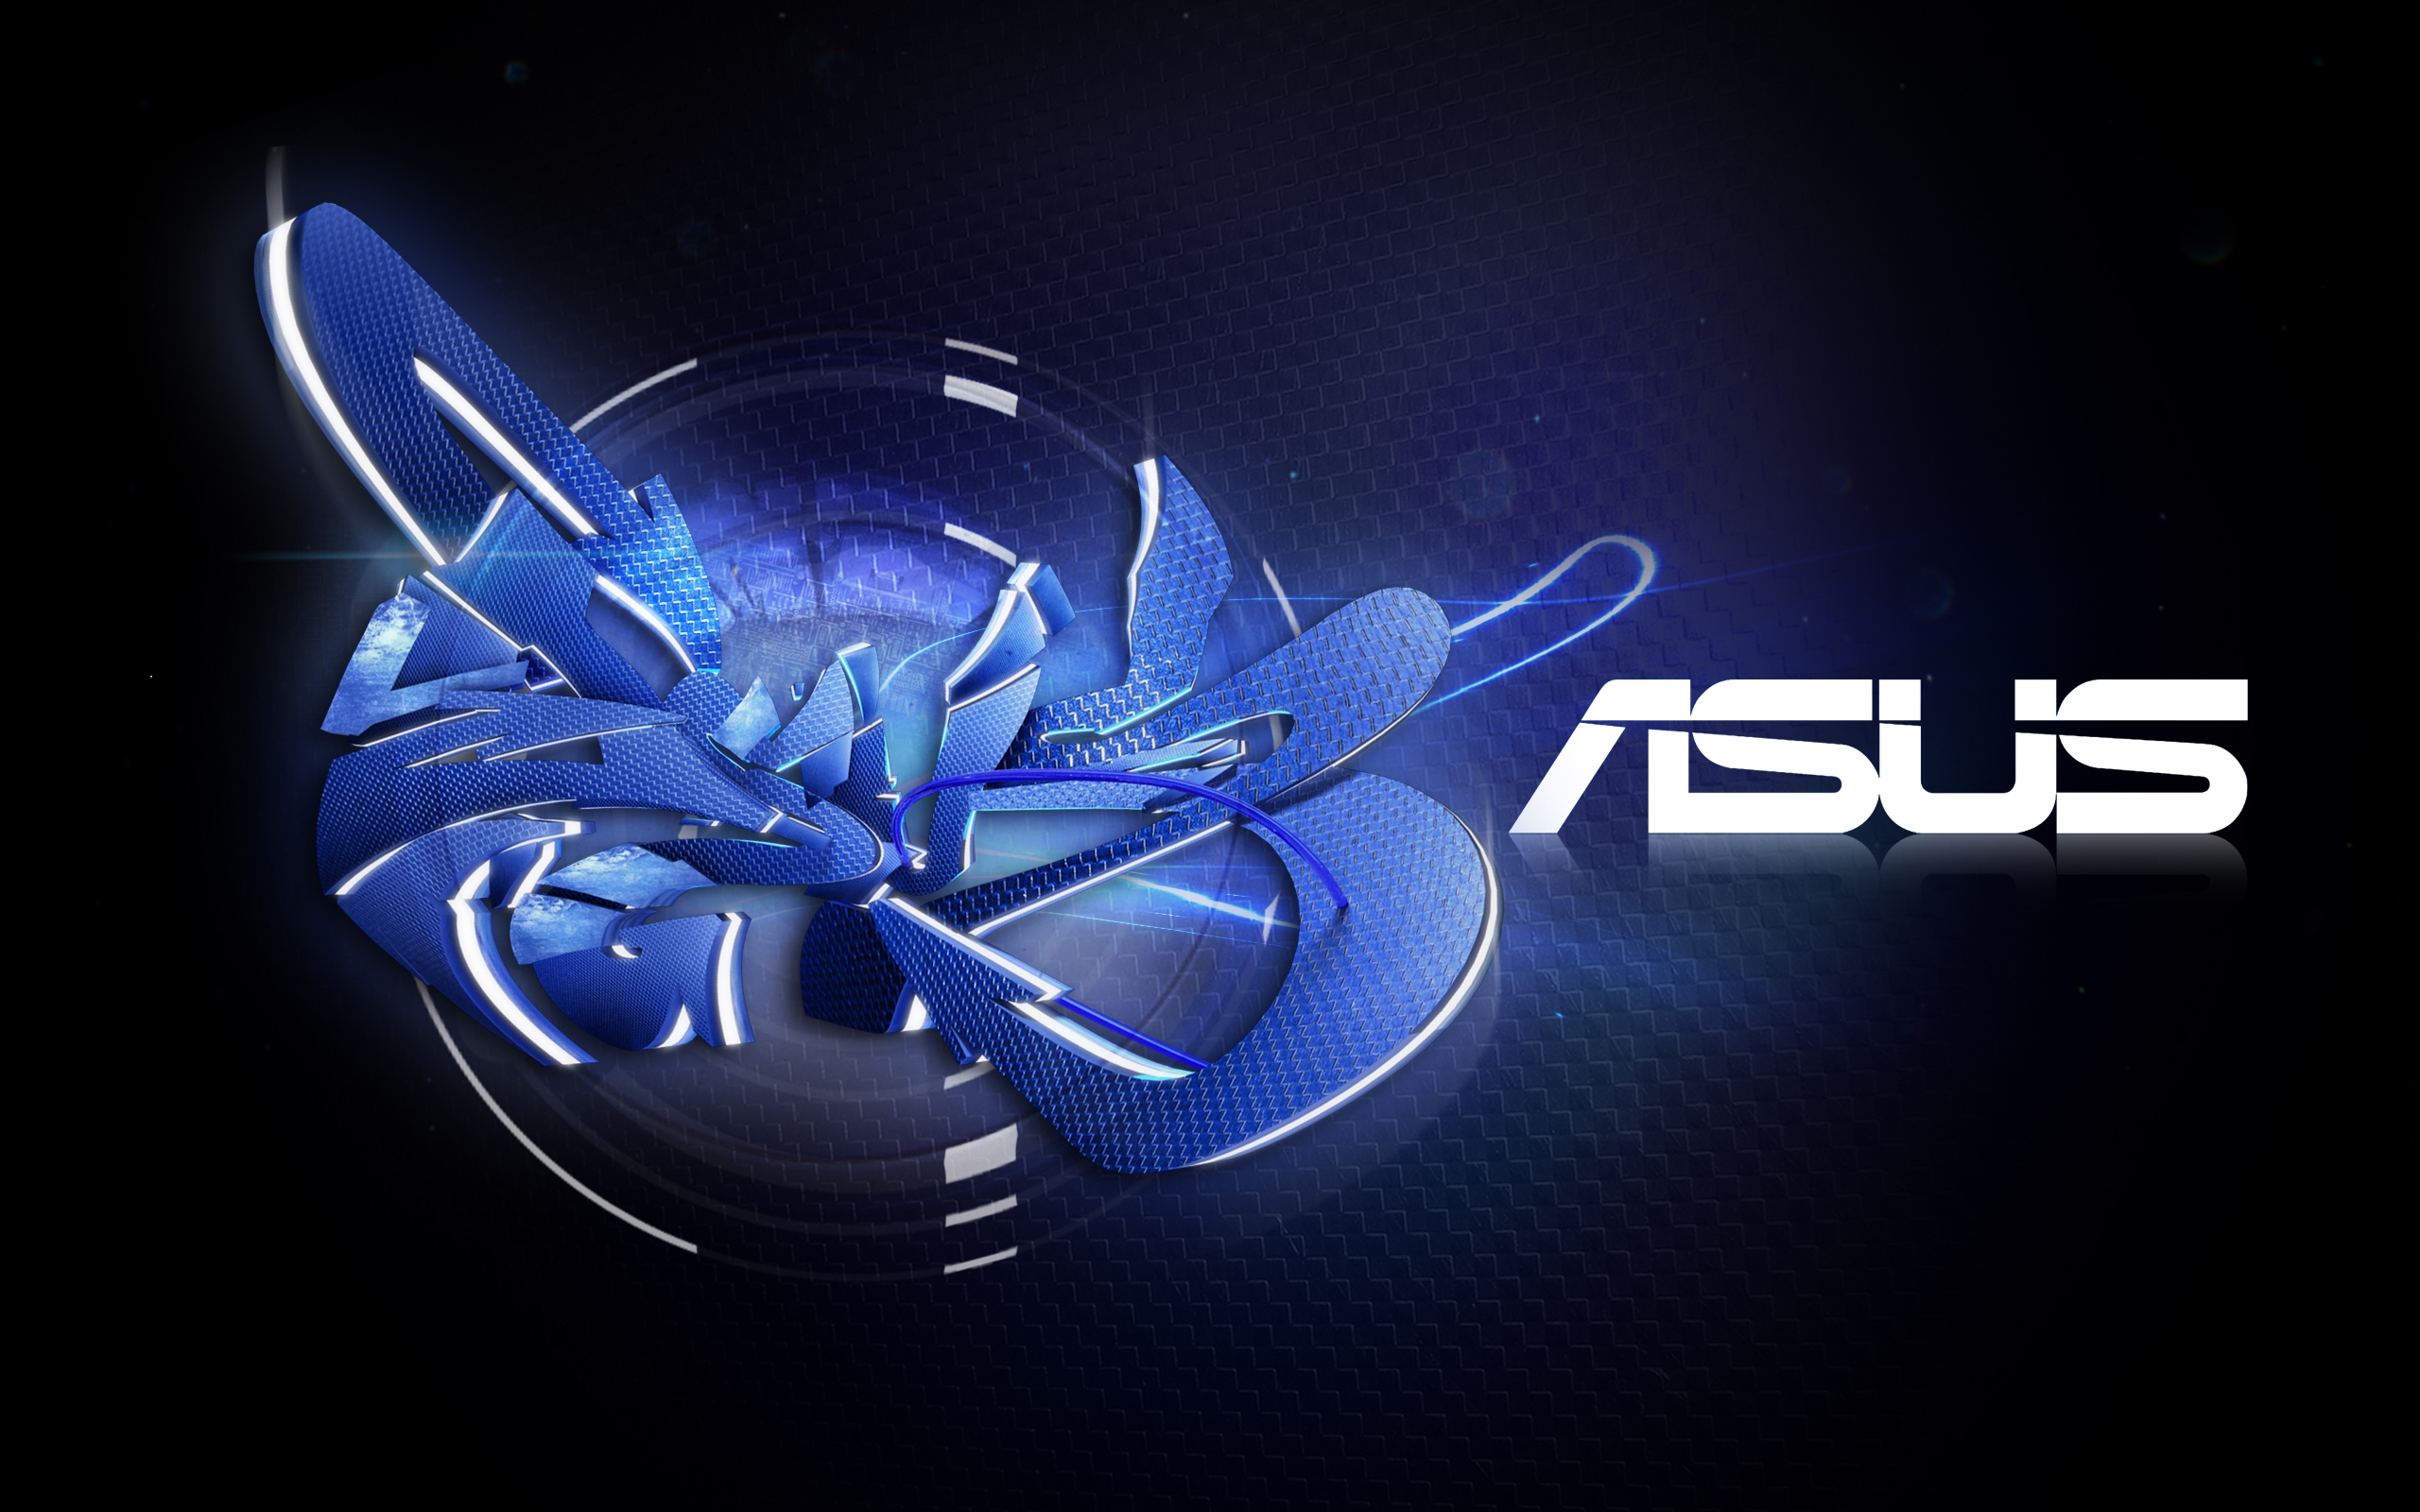 ASUS for 2560 x 1600 widescreen resolution